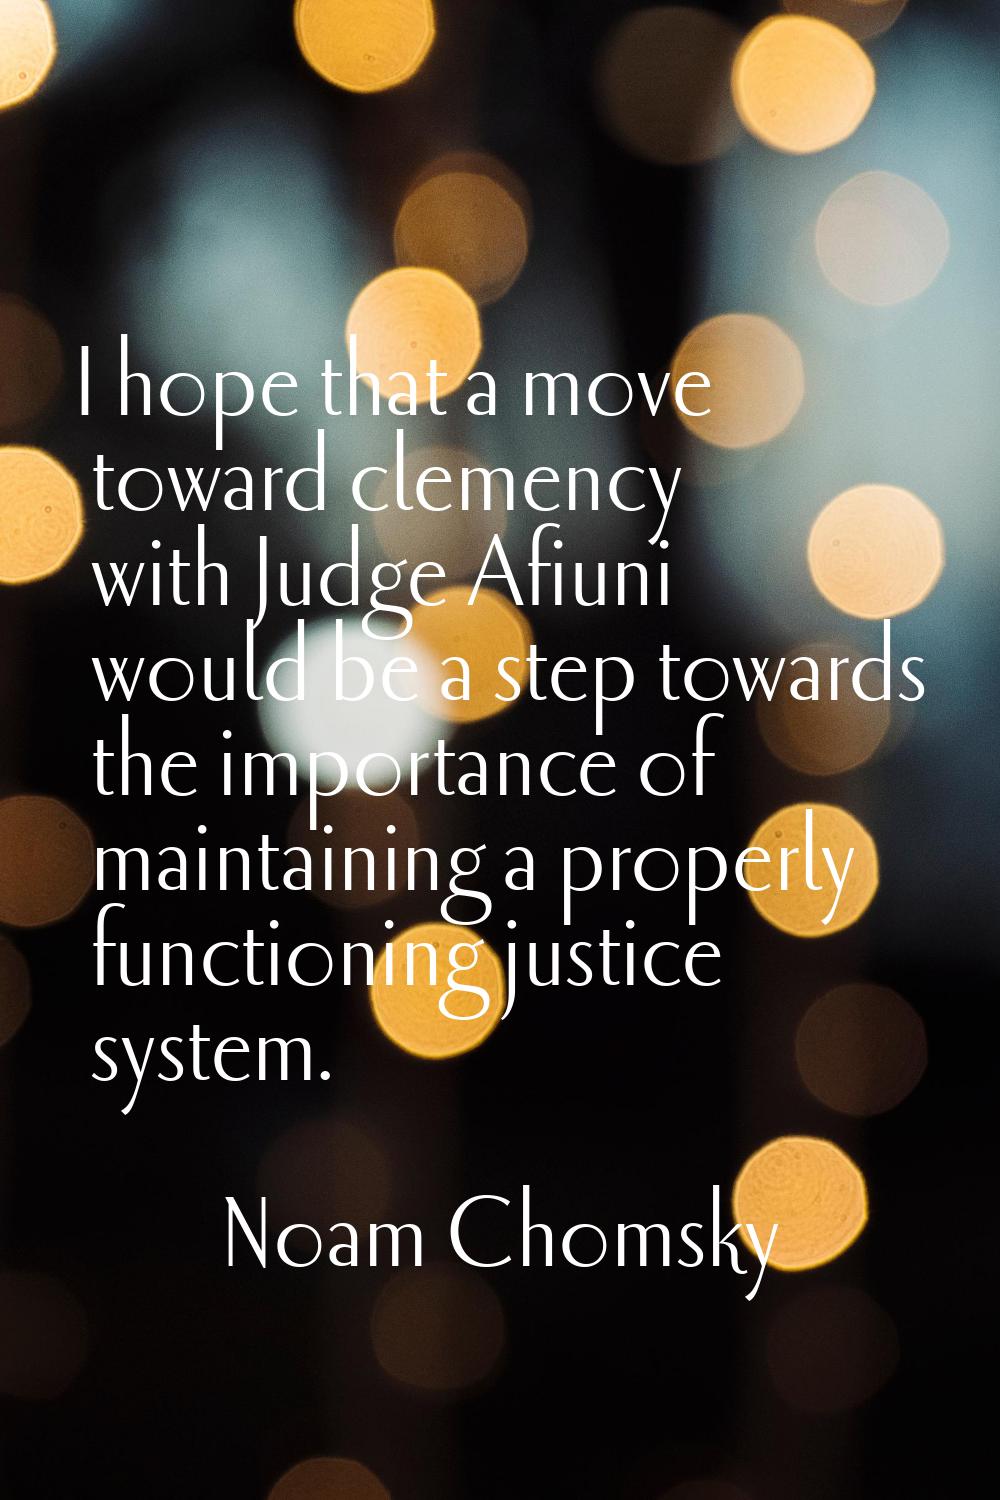 I hope that a move toward clemency with Judge Afiuni would be a step towards the importance of main